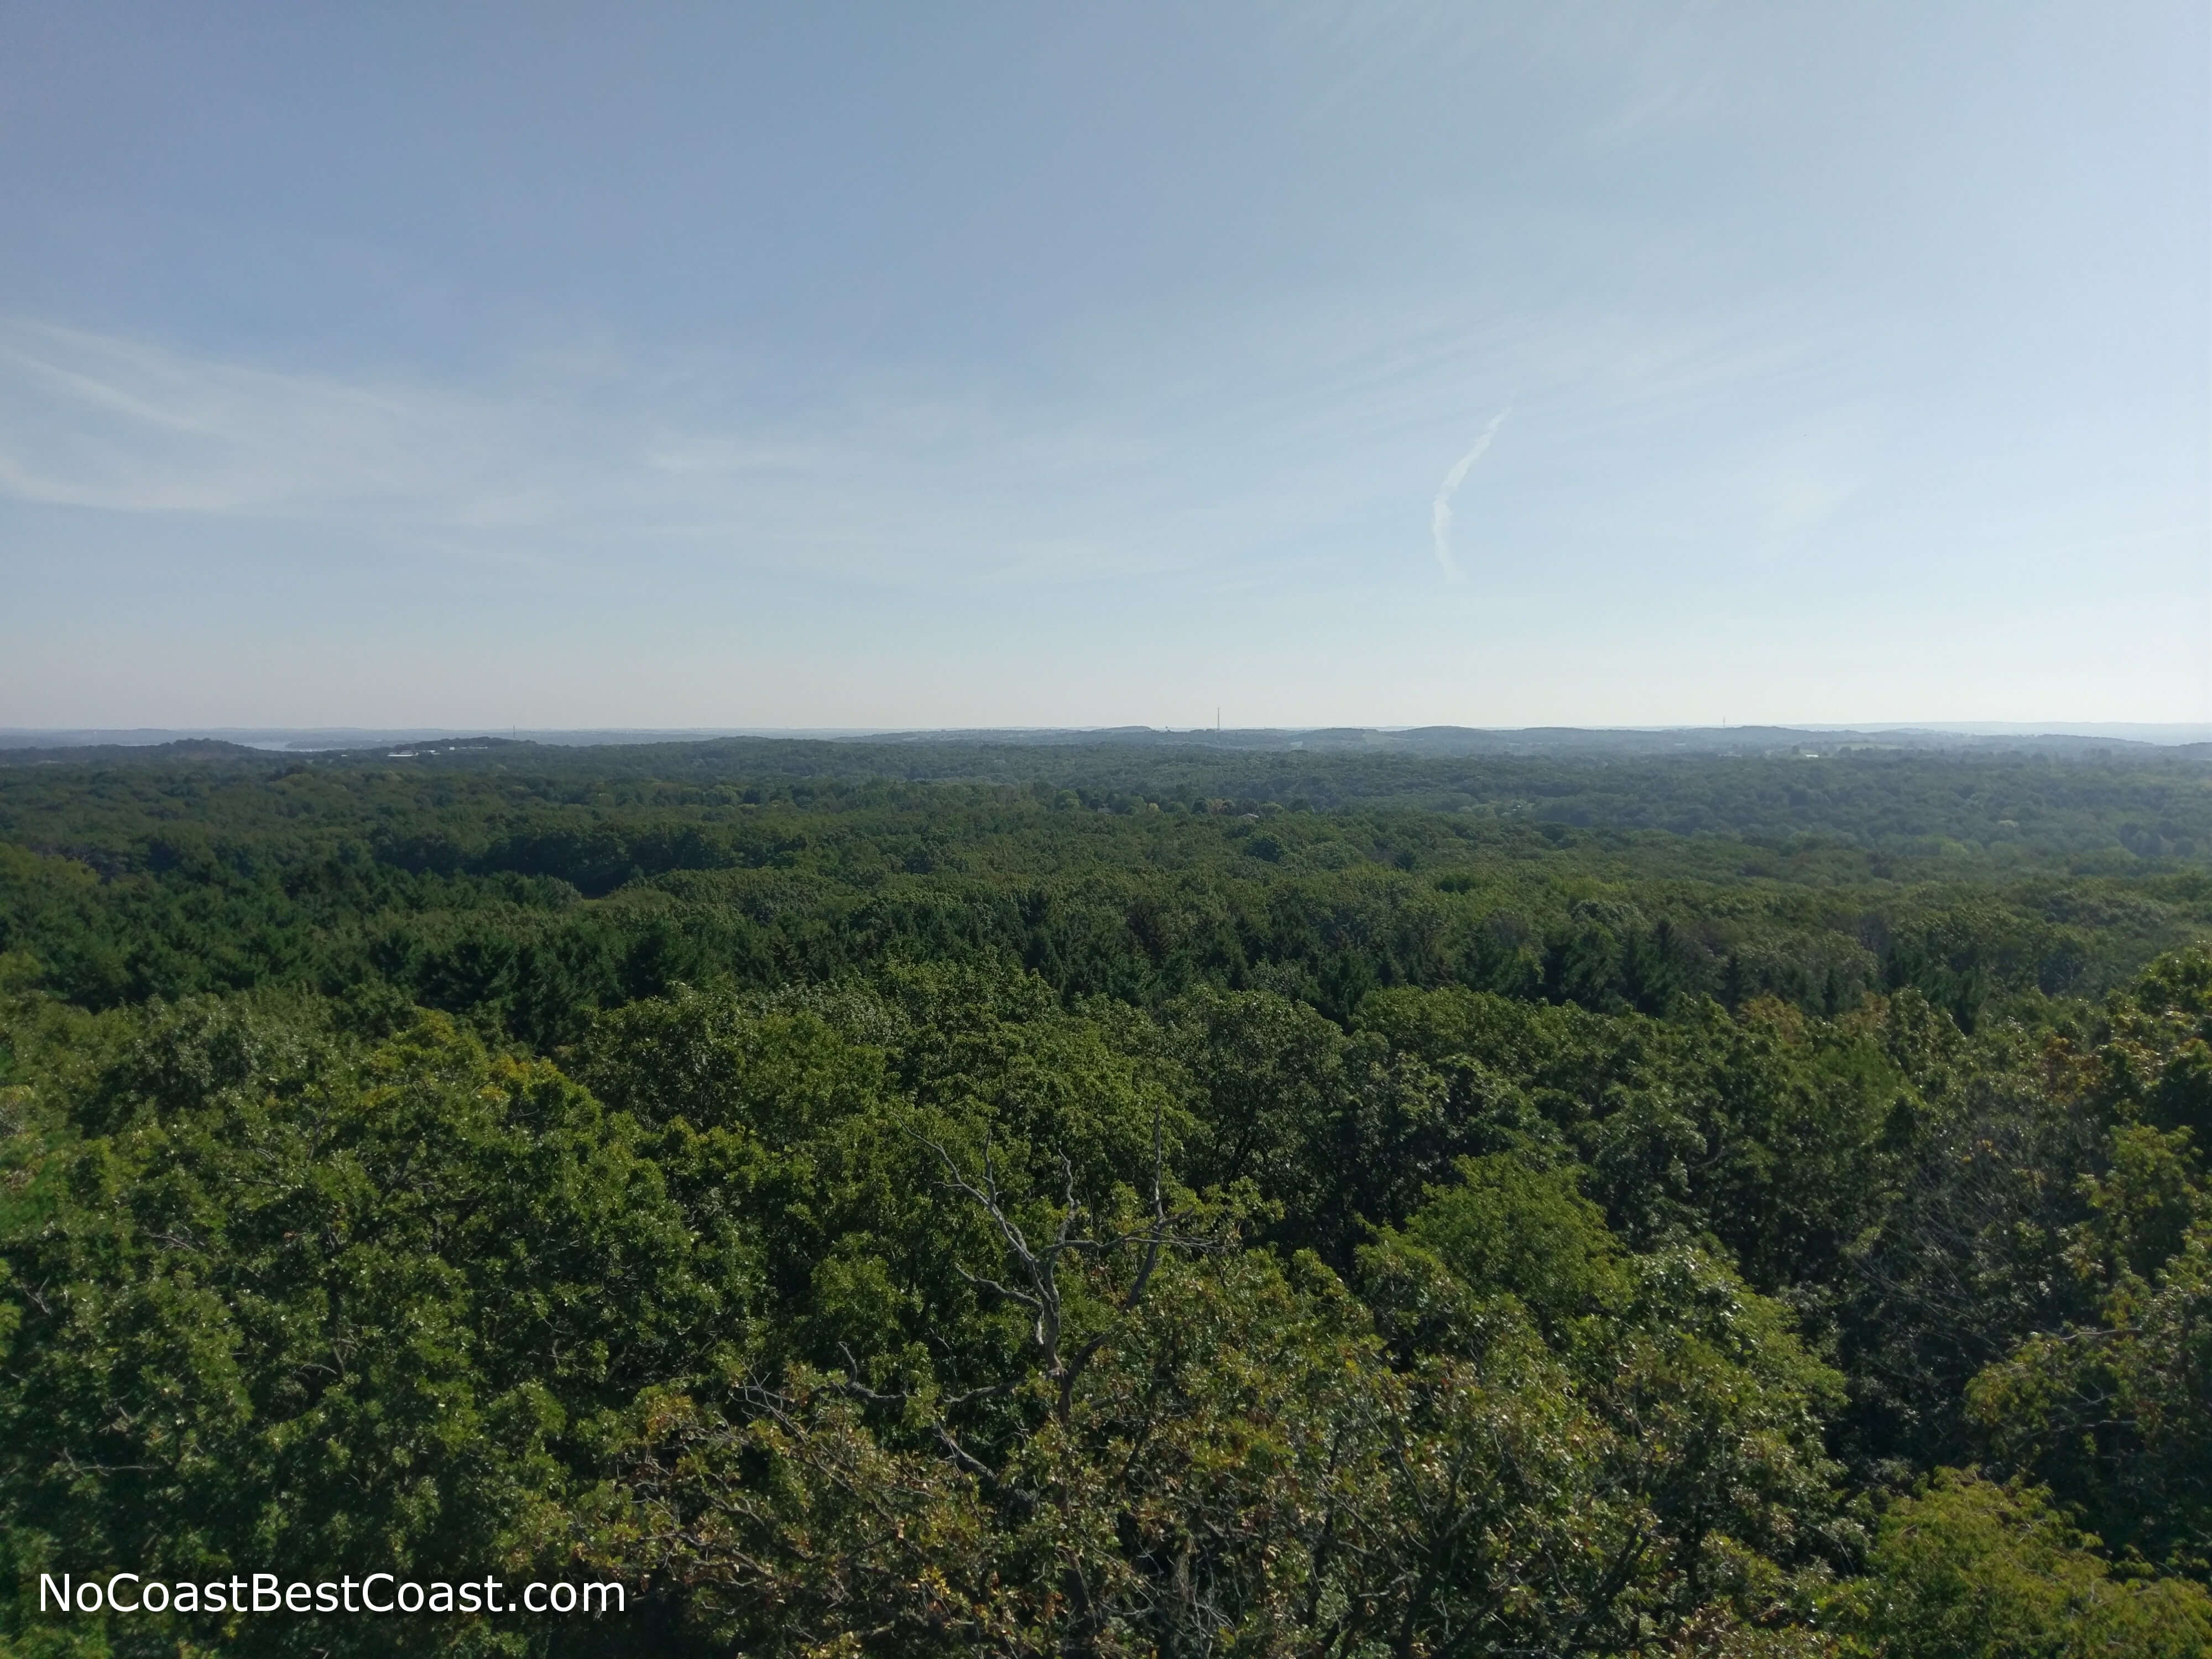 The view from the top of the observation tower on Lapham Peak